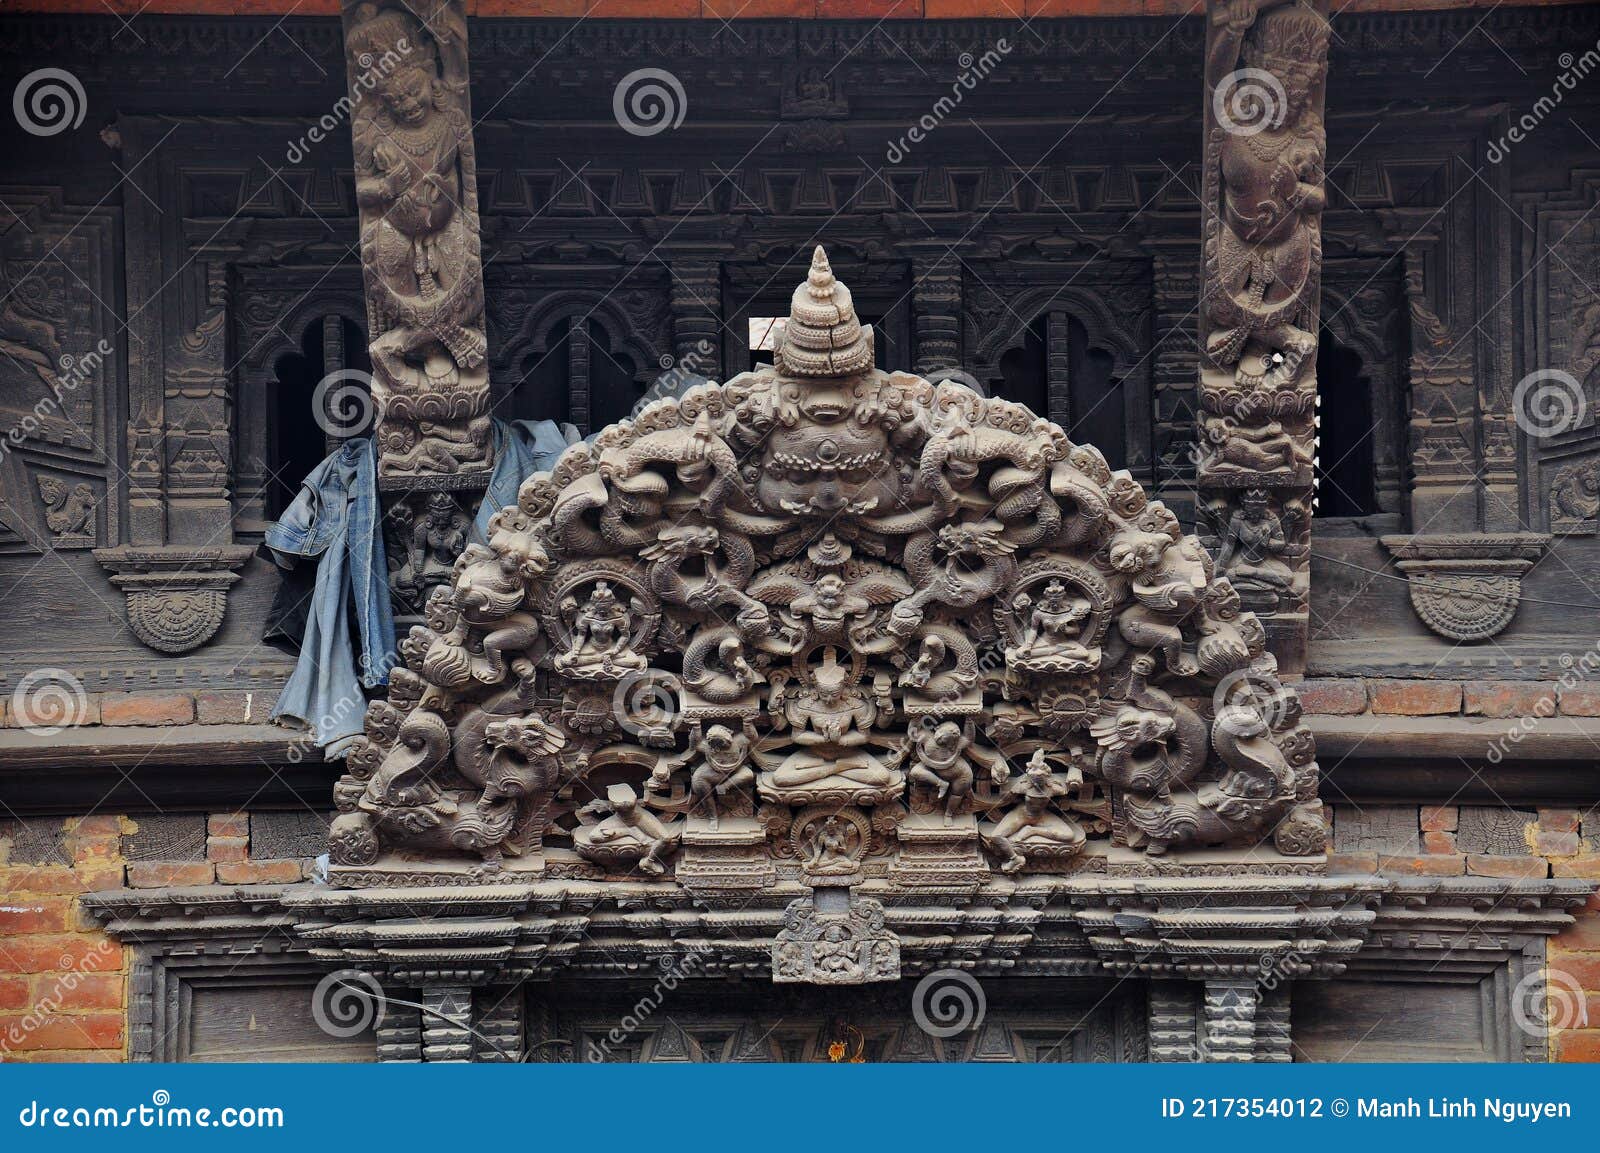 traditional sculpture in nepal - old, ancien, mystery and beautiful